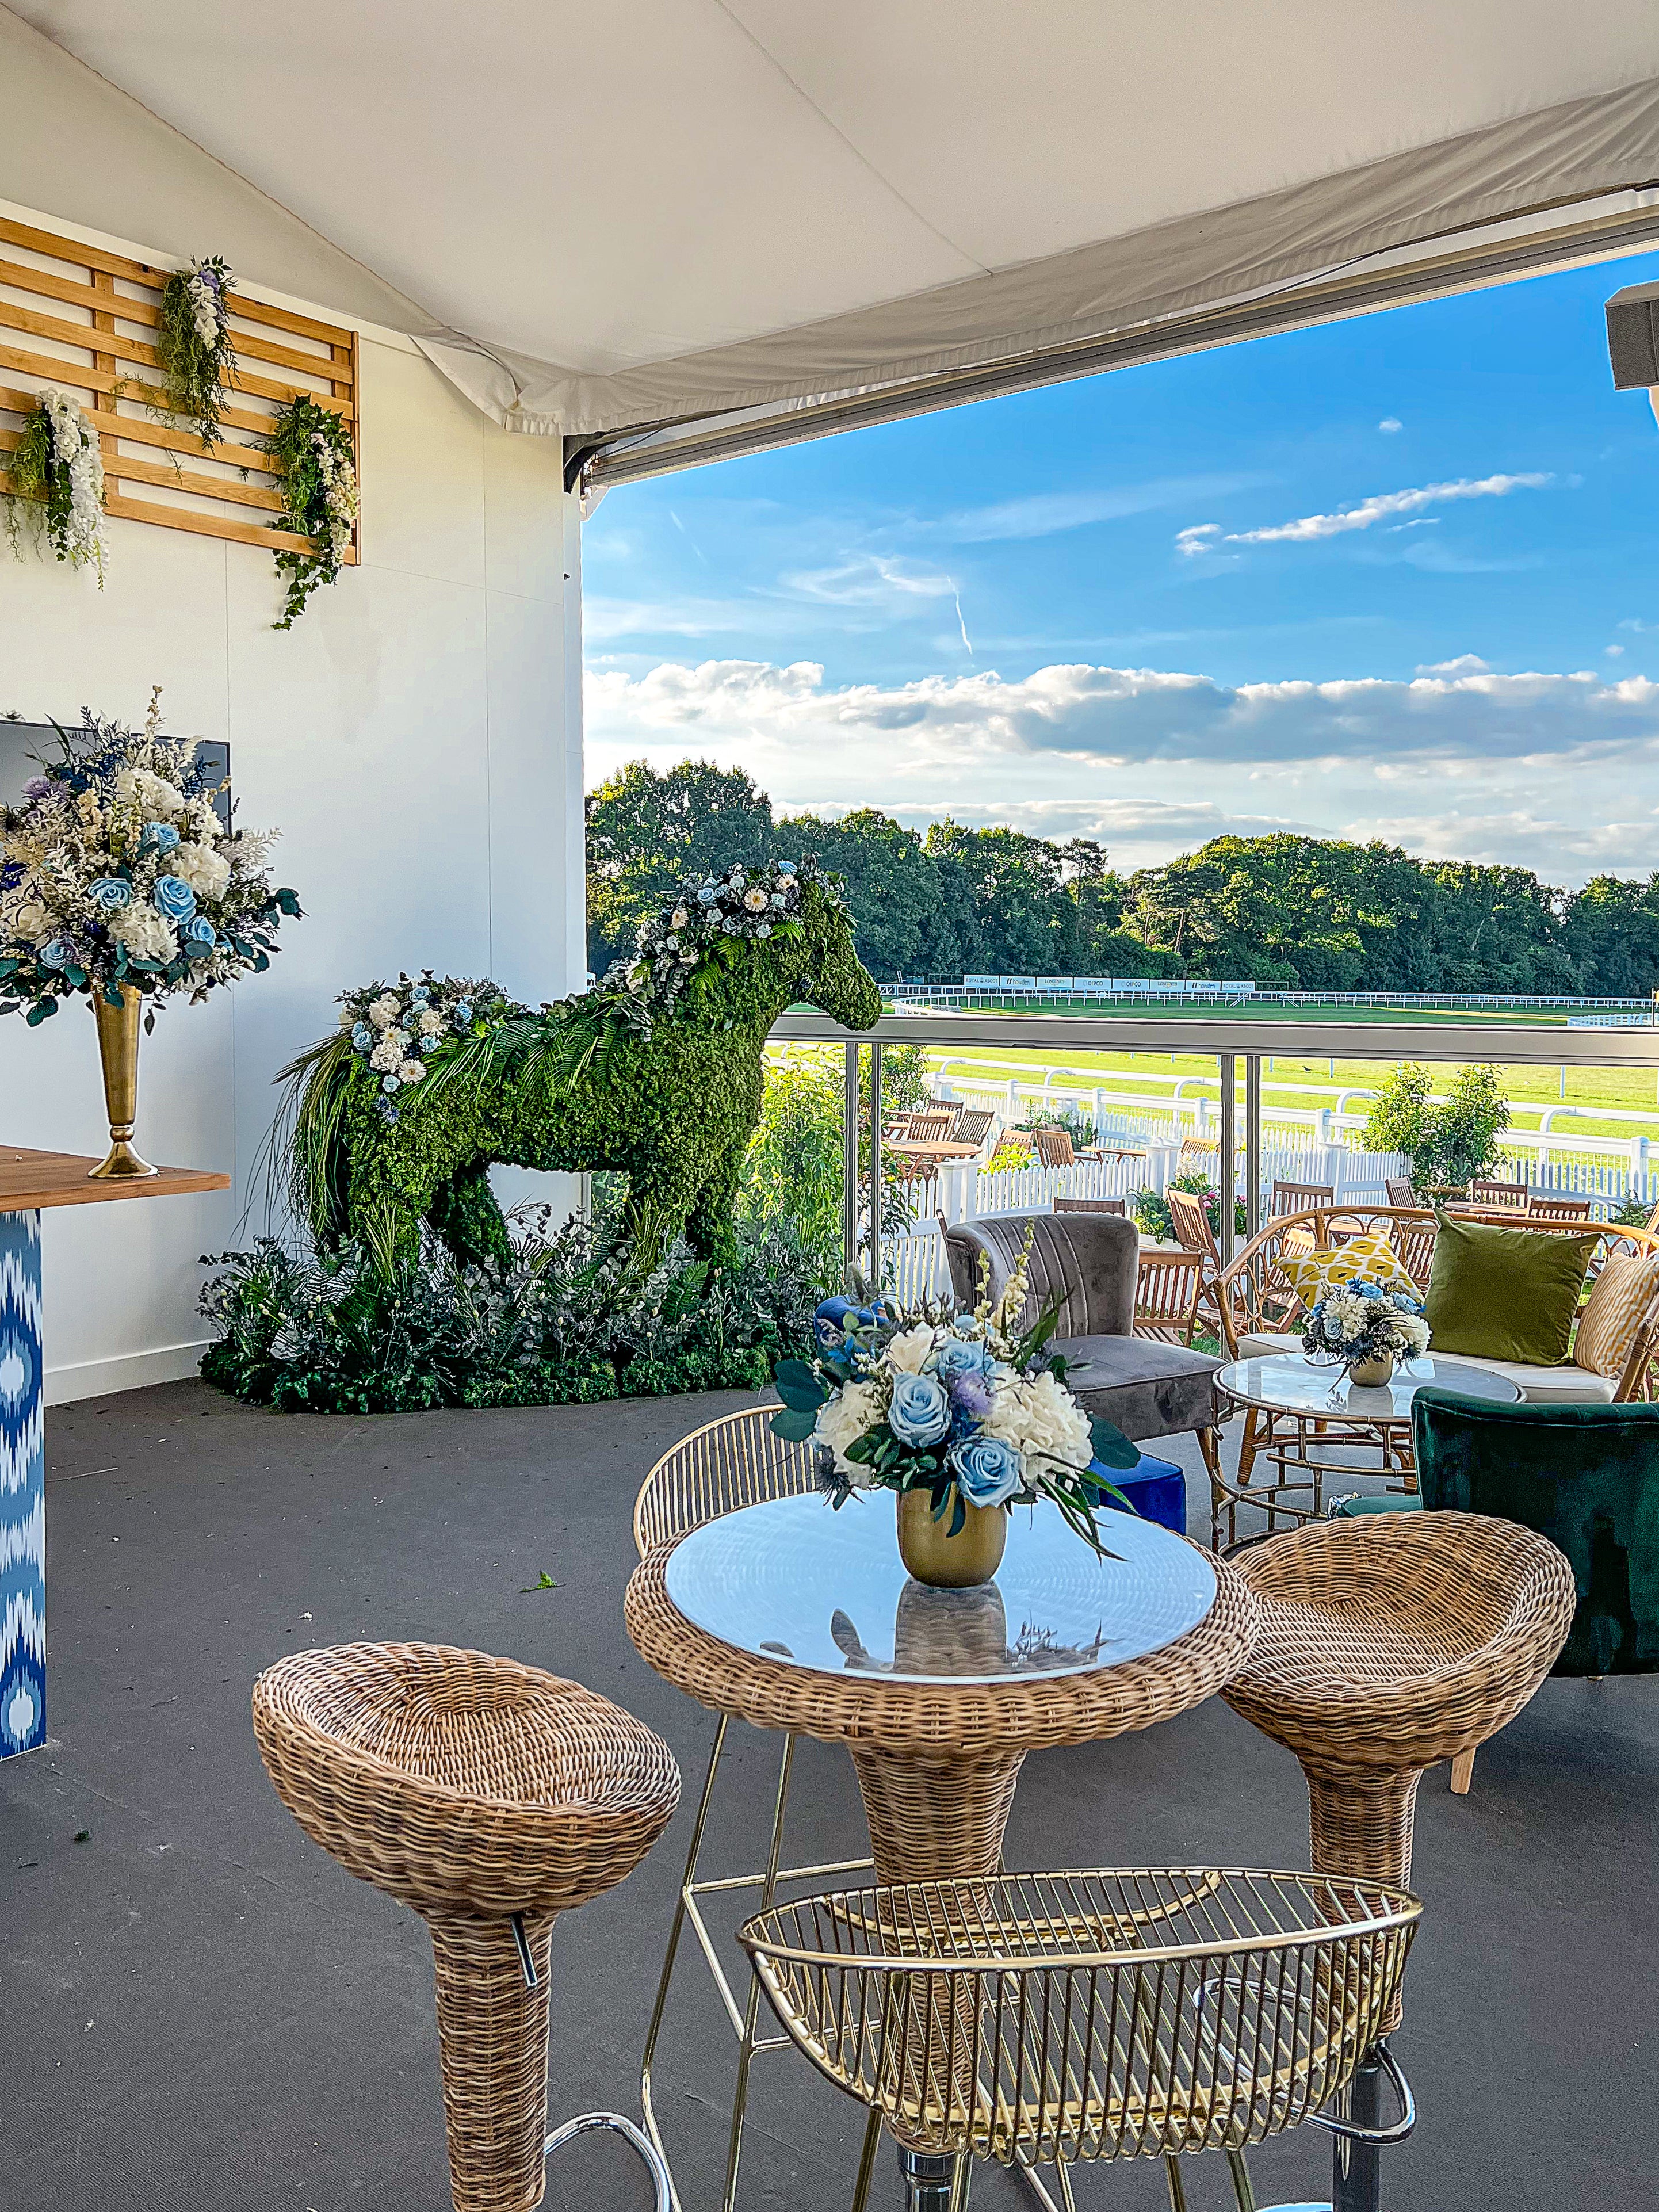 Royal Ascot Racecourse Decked Out with Bespoke Flower for Events